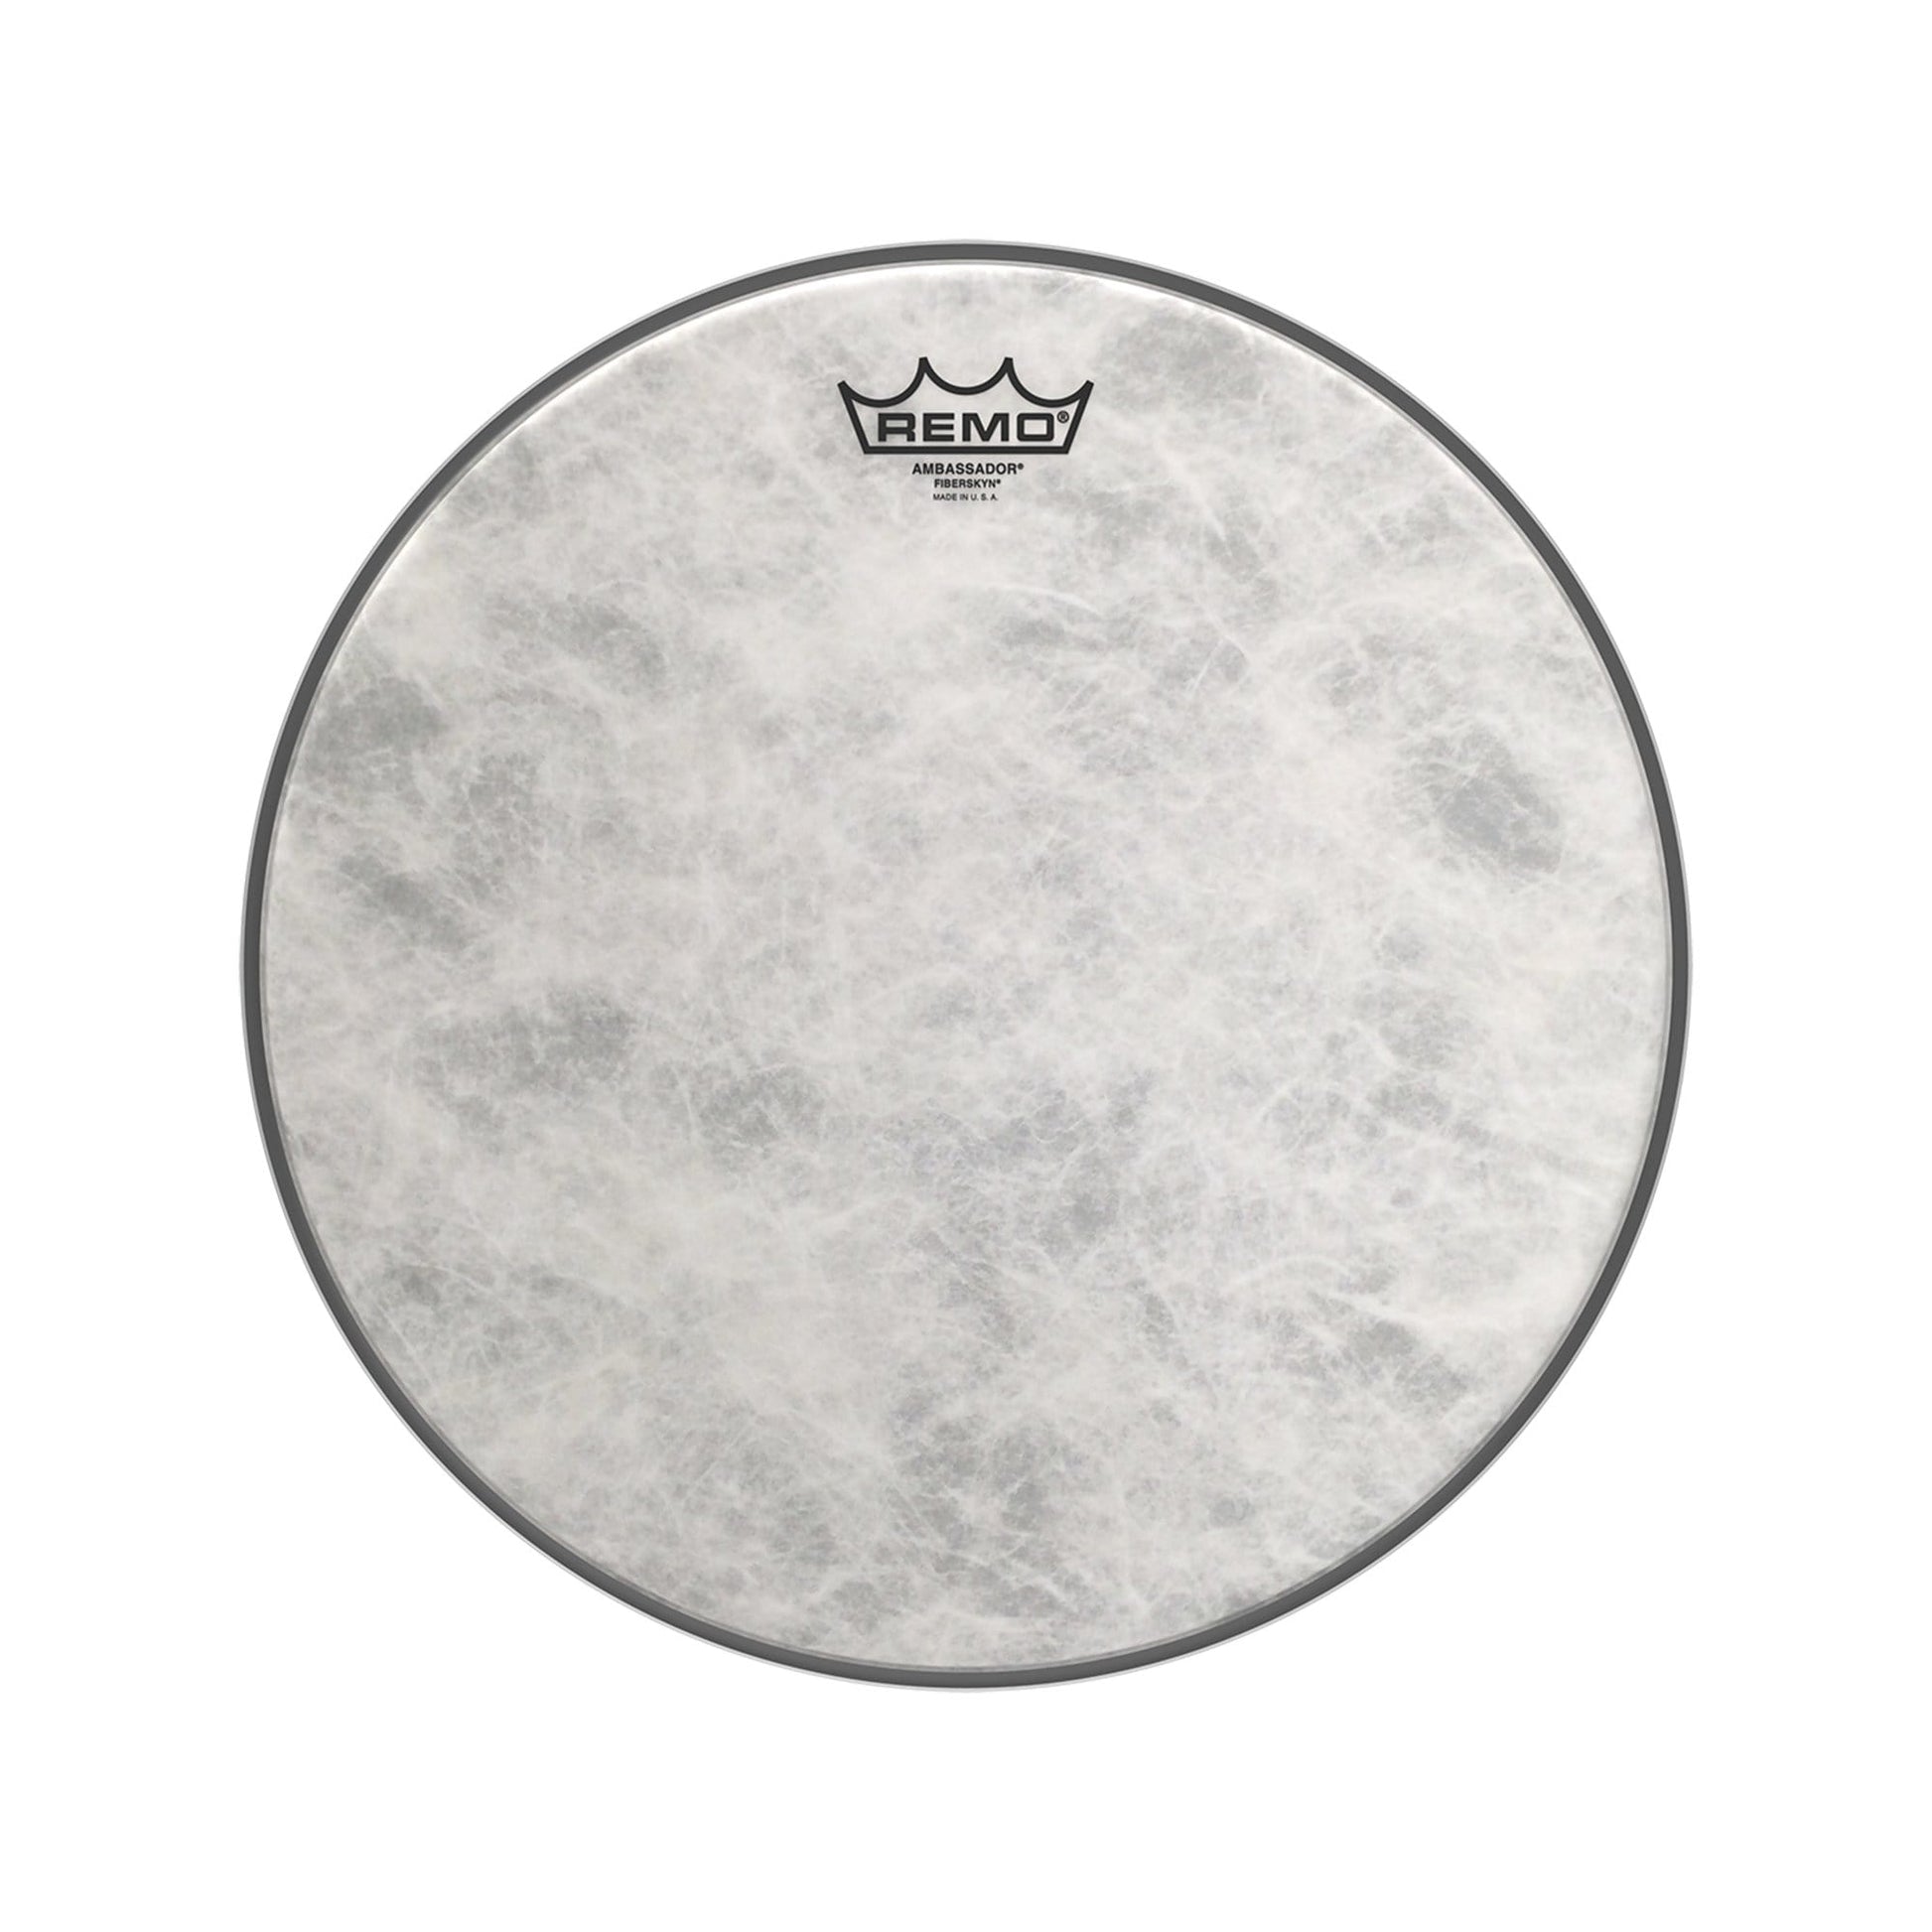 Remo 13" Ambassador Fiberskyn Drumhead Drums and Percussion / Parts and Accessories / Heads